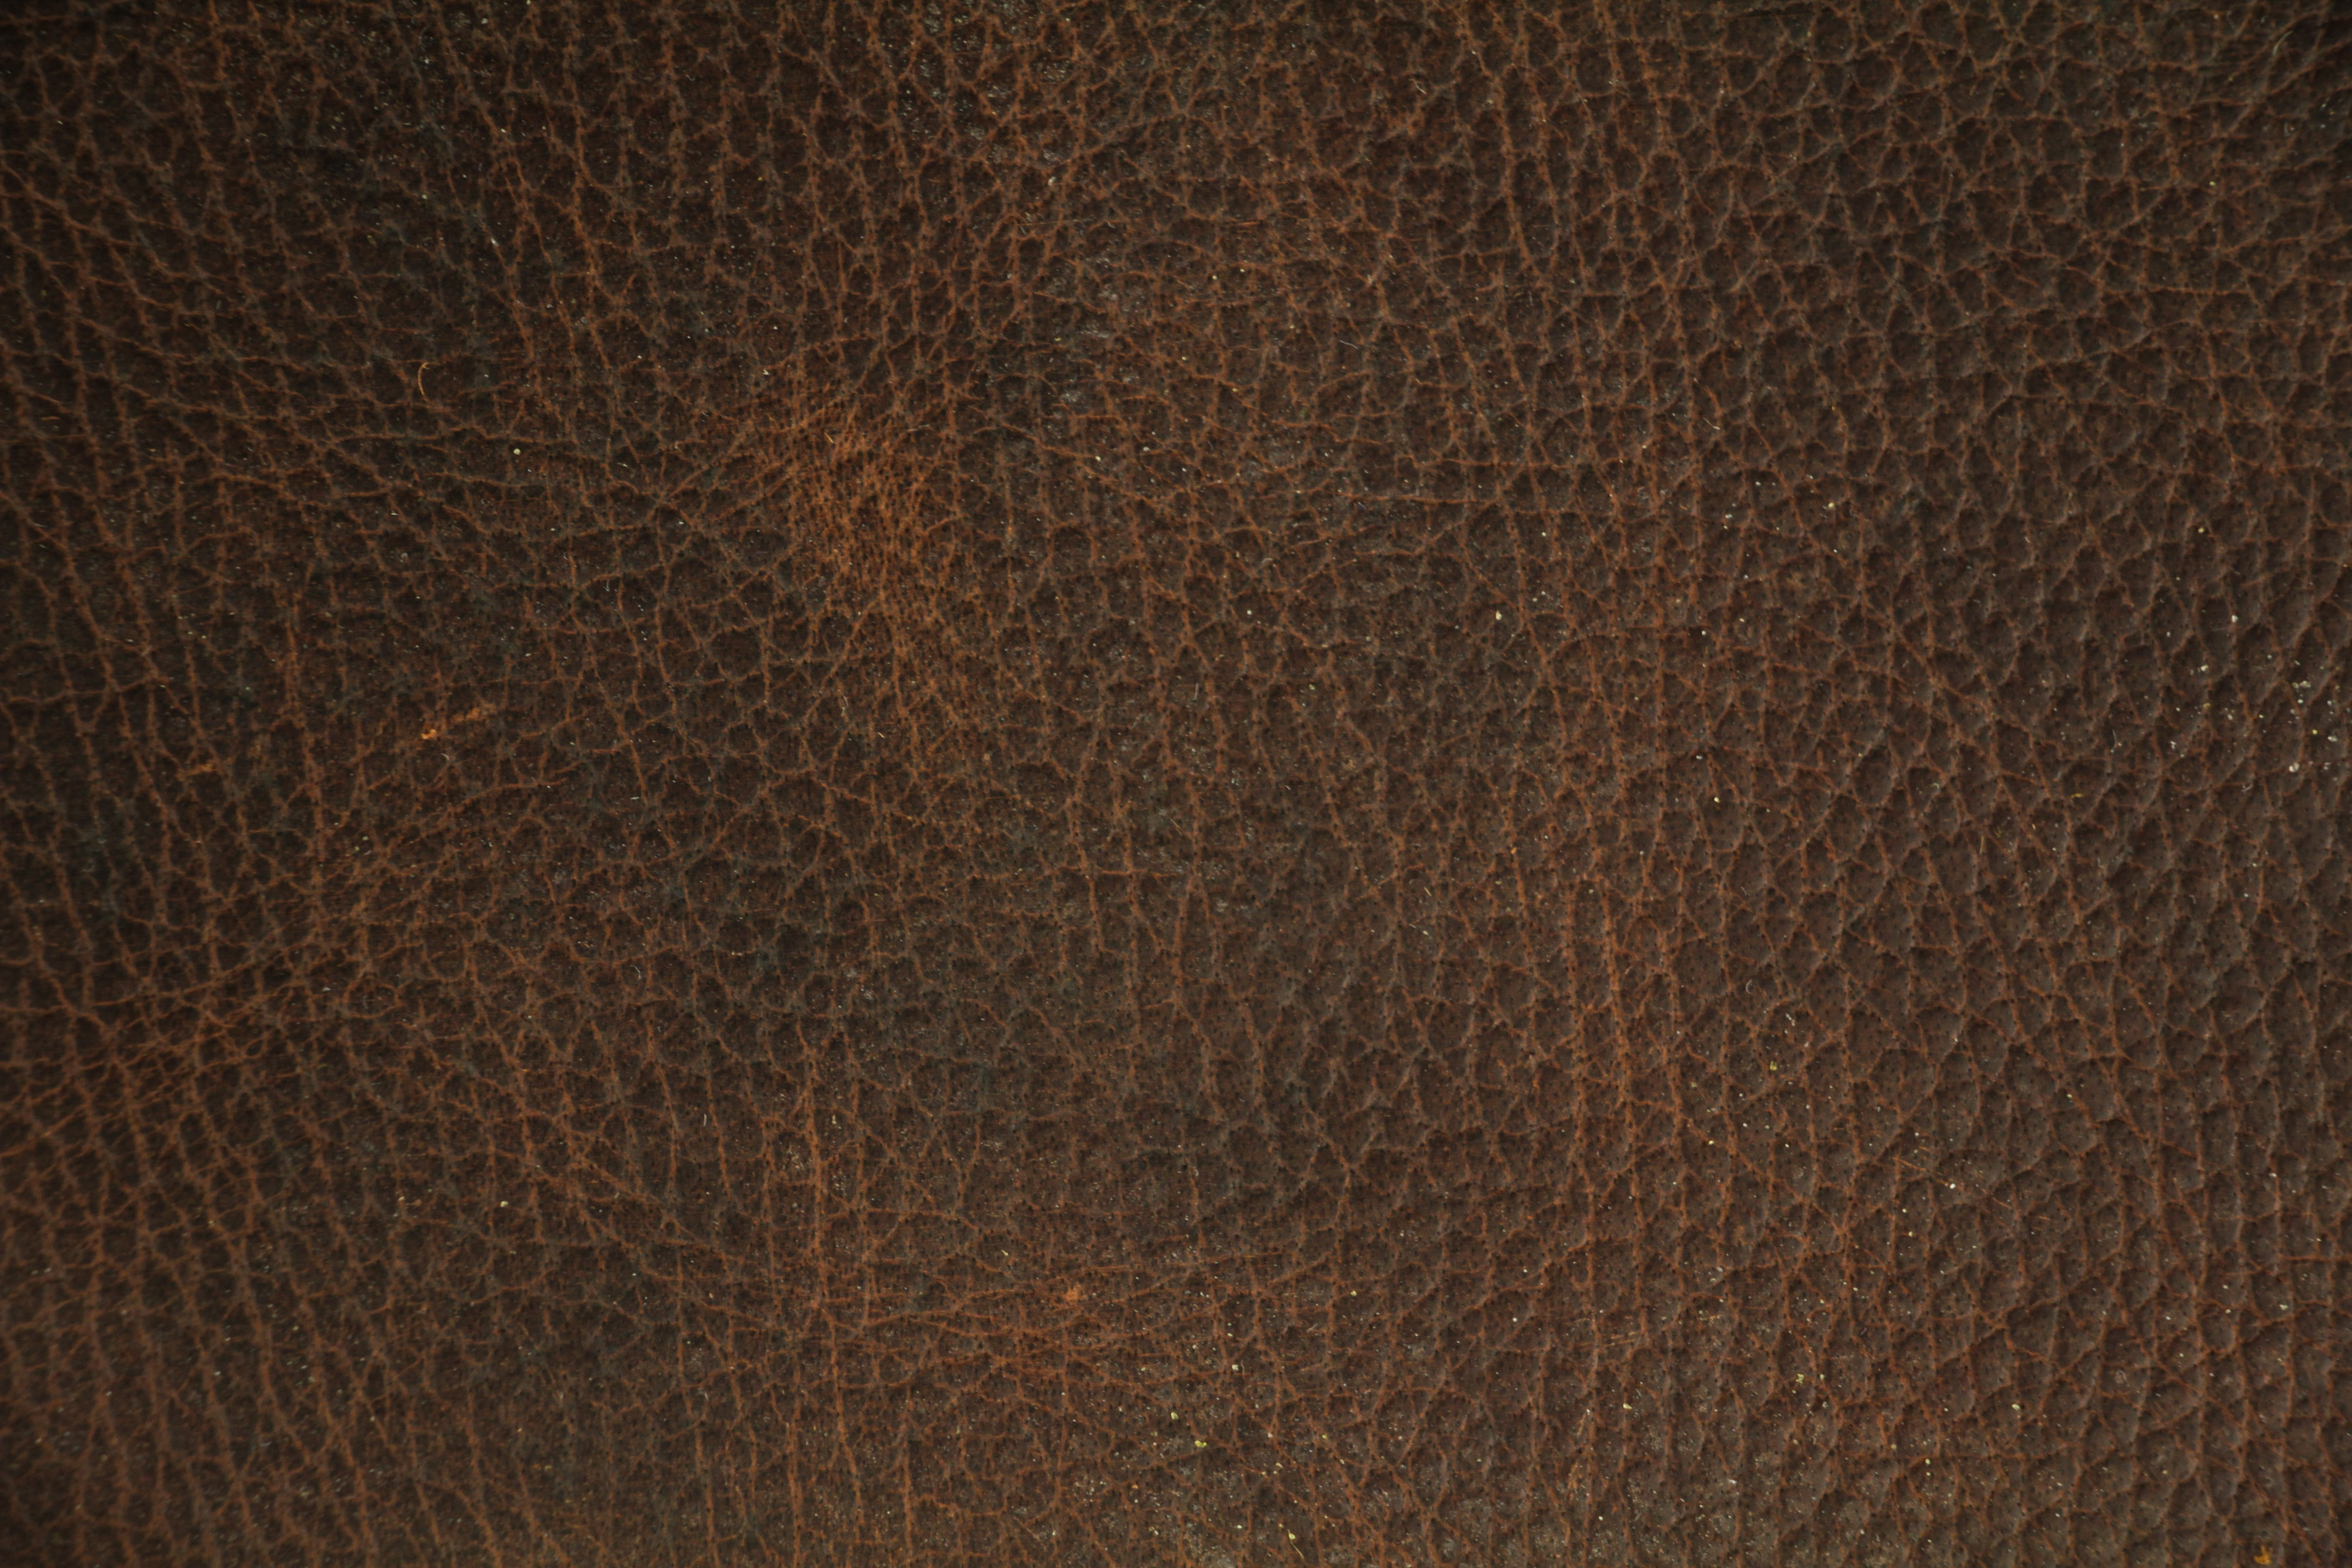 dark leather texture brown clouded hand made genuine stock photo ...